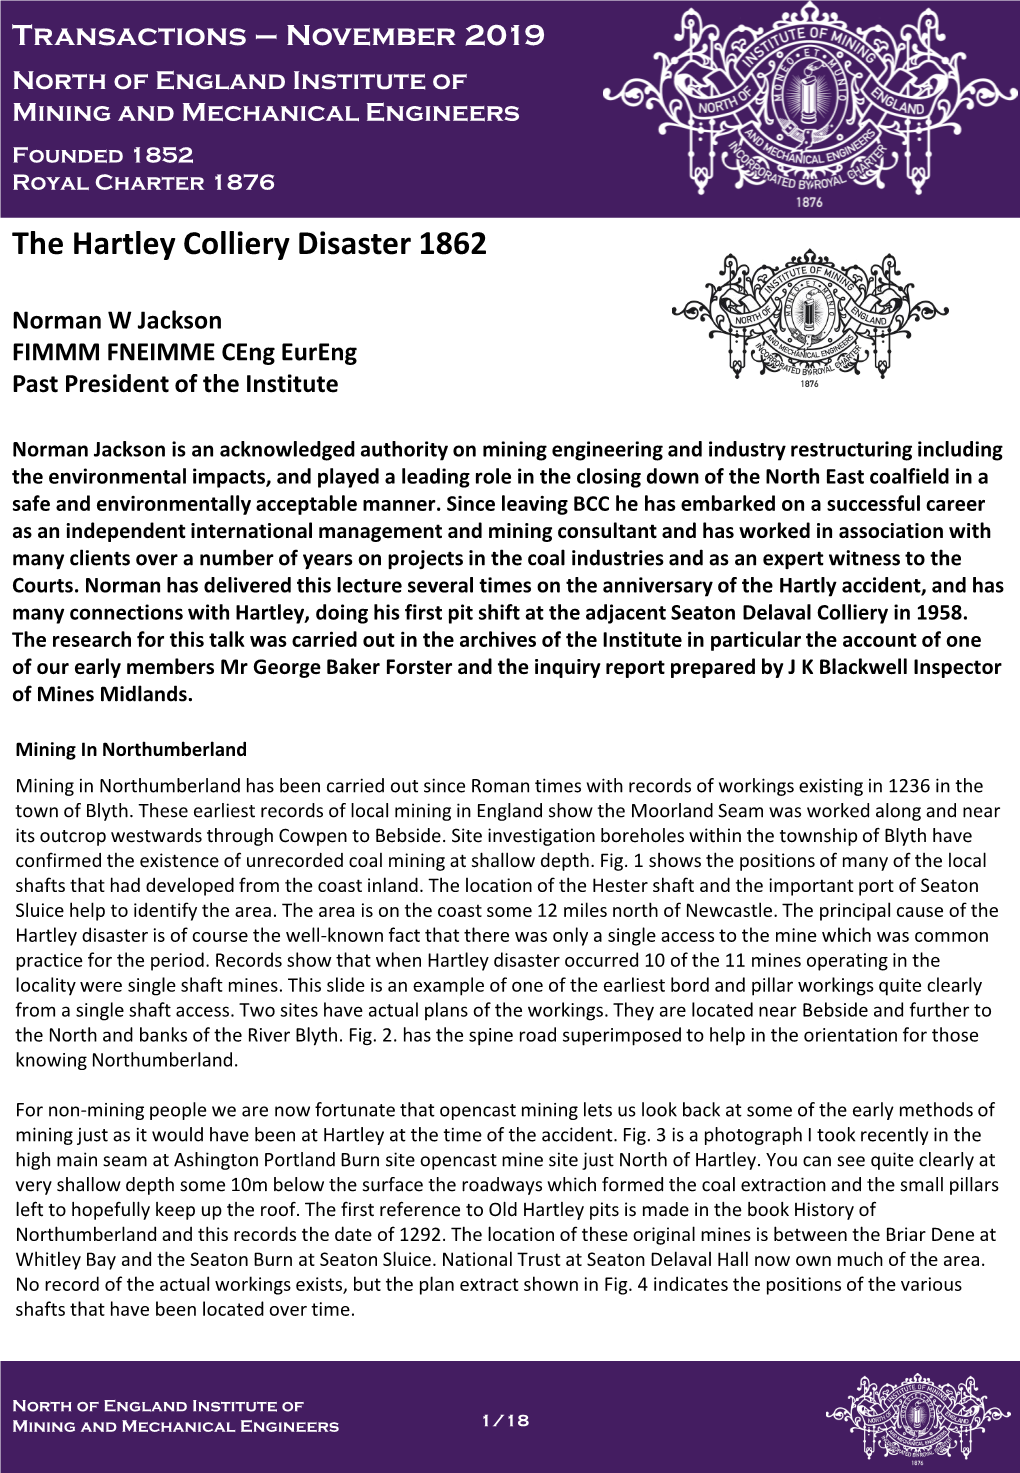 The Hartley Colliery Disaster 1862